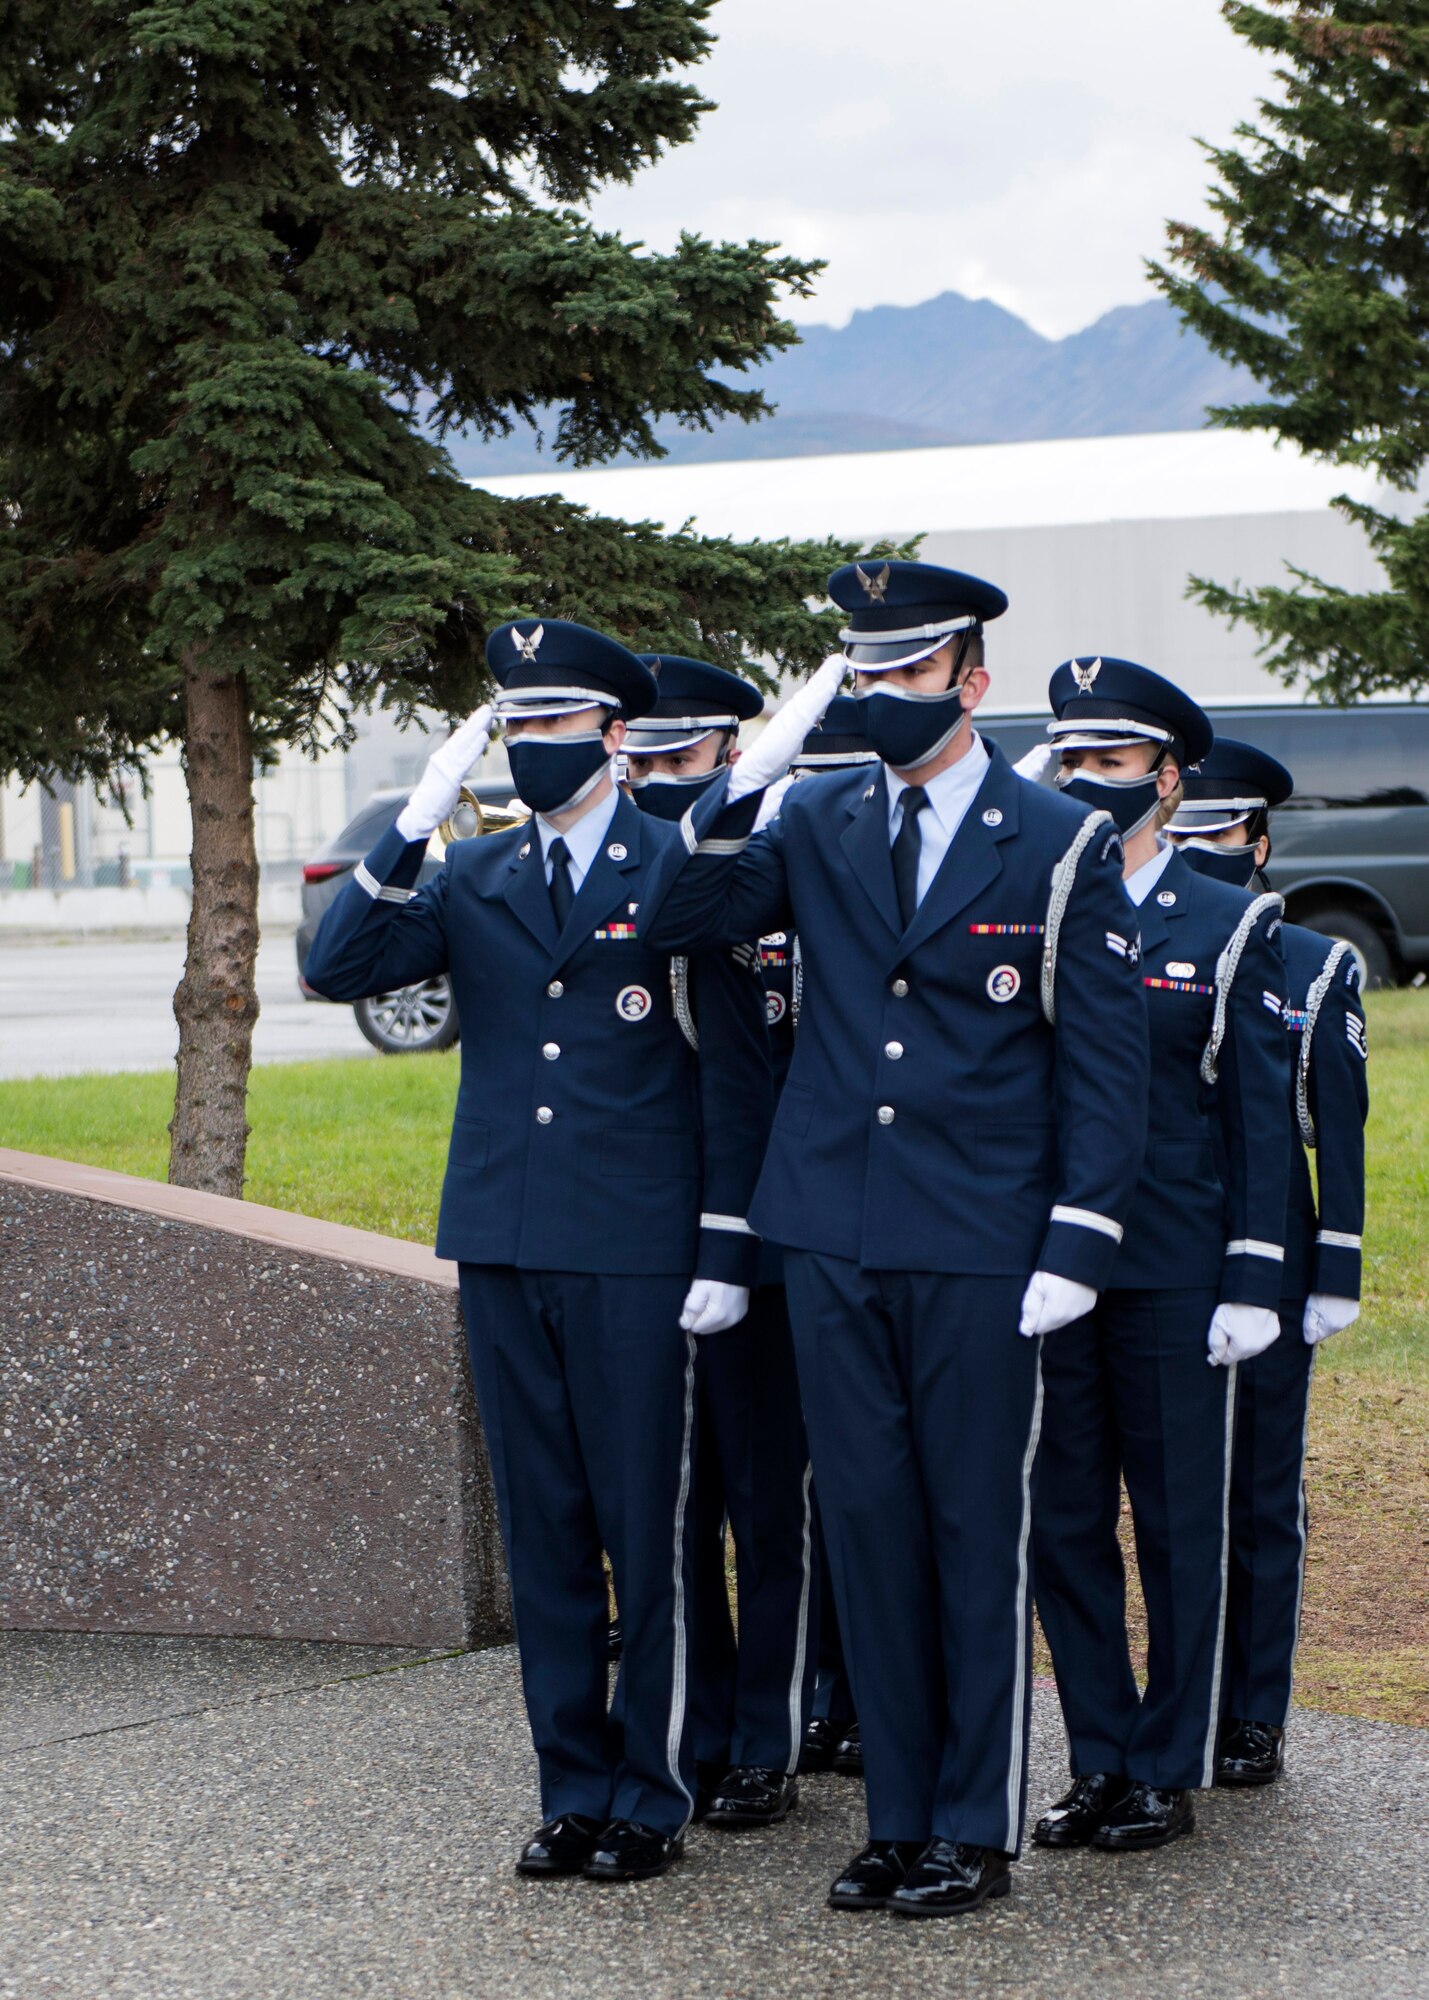 The U.S. Air Force Honor Guard renders a salute at the Yukla 27 25th anniversary memorial ceremony at Joint Base Elmendorf-Richardson, Alaska, Sept. 22, 2020. Yukla 27, a U.S. Air Force E-3 Sentry airborne warning and control system aircraft assigned to the 962nd AACS, encountered a flock of geese Sept. 22, 1995, and crashed shortly after takeoff on a routine surveillance training sortie, killing all 24 Canadian and U.S. Airmen aboard.